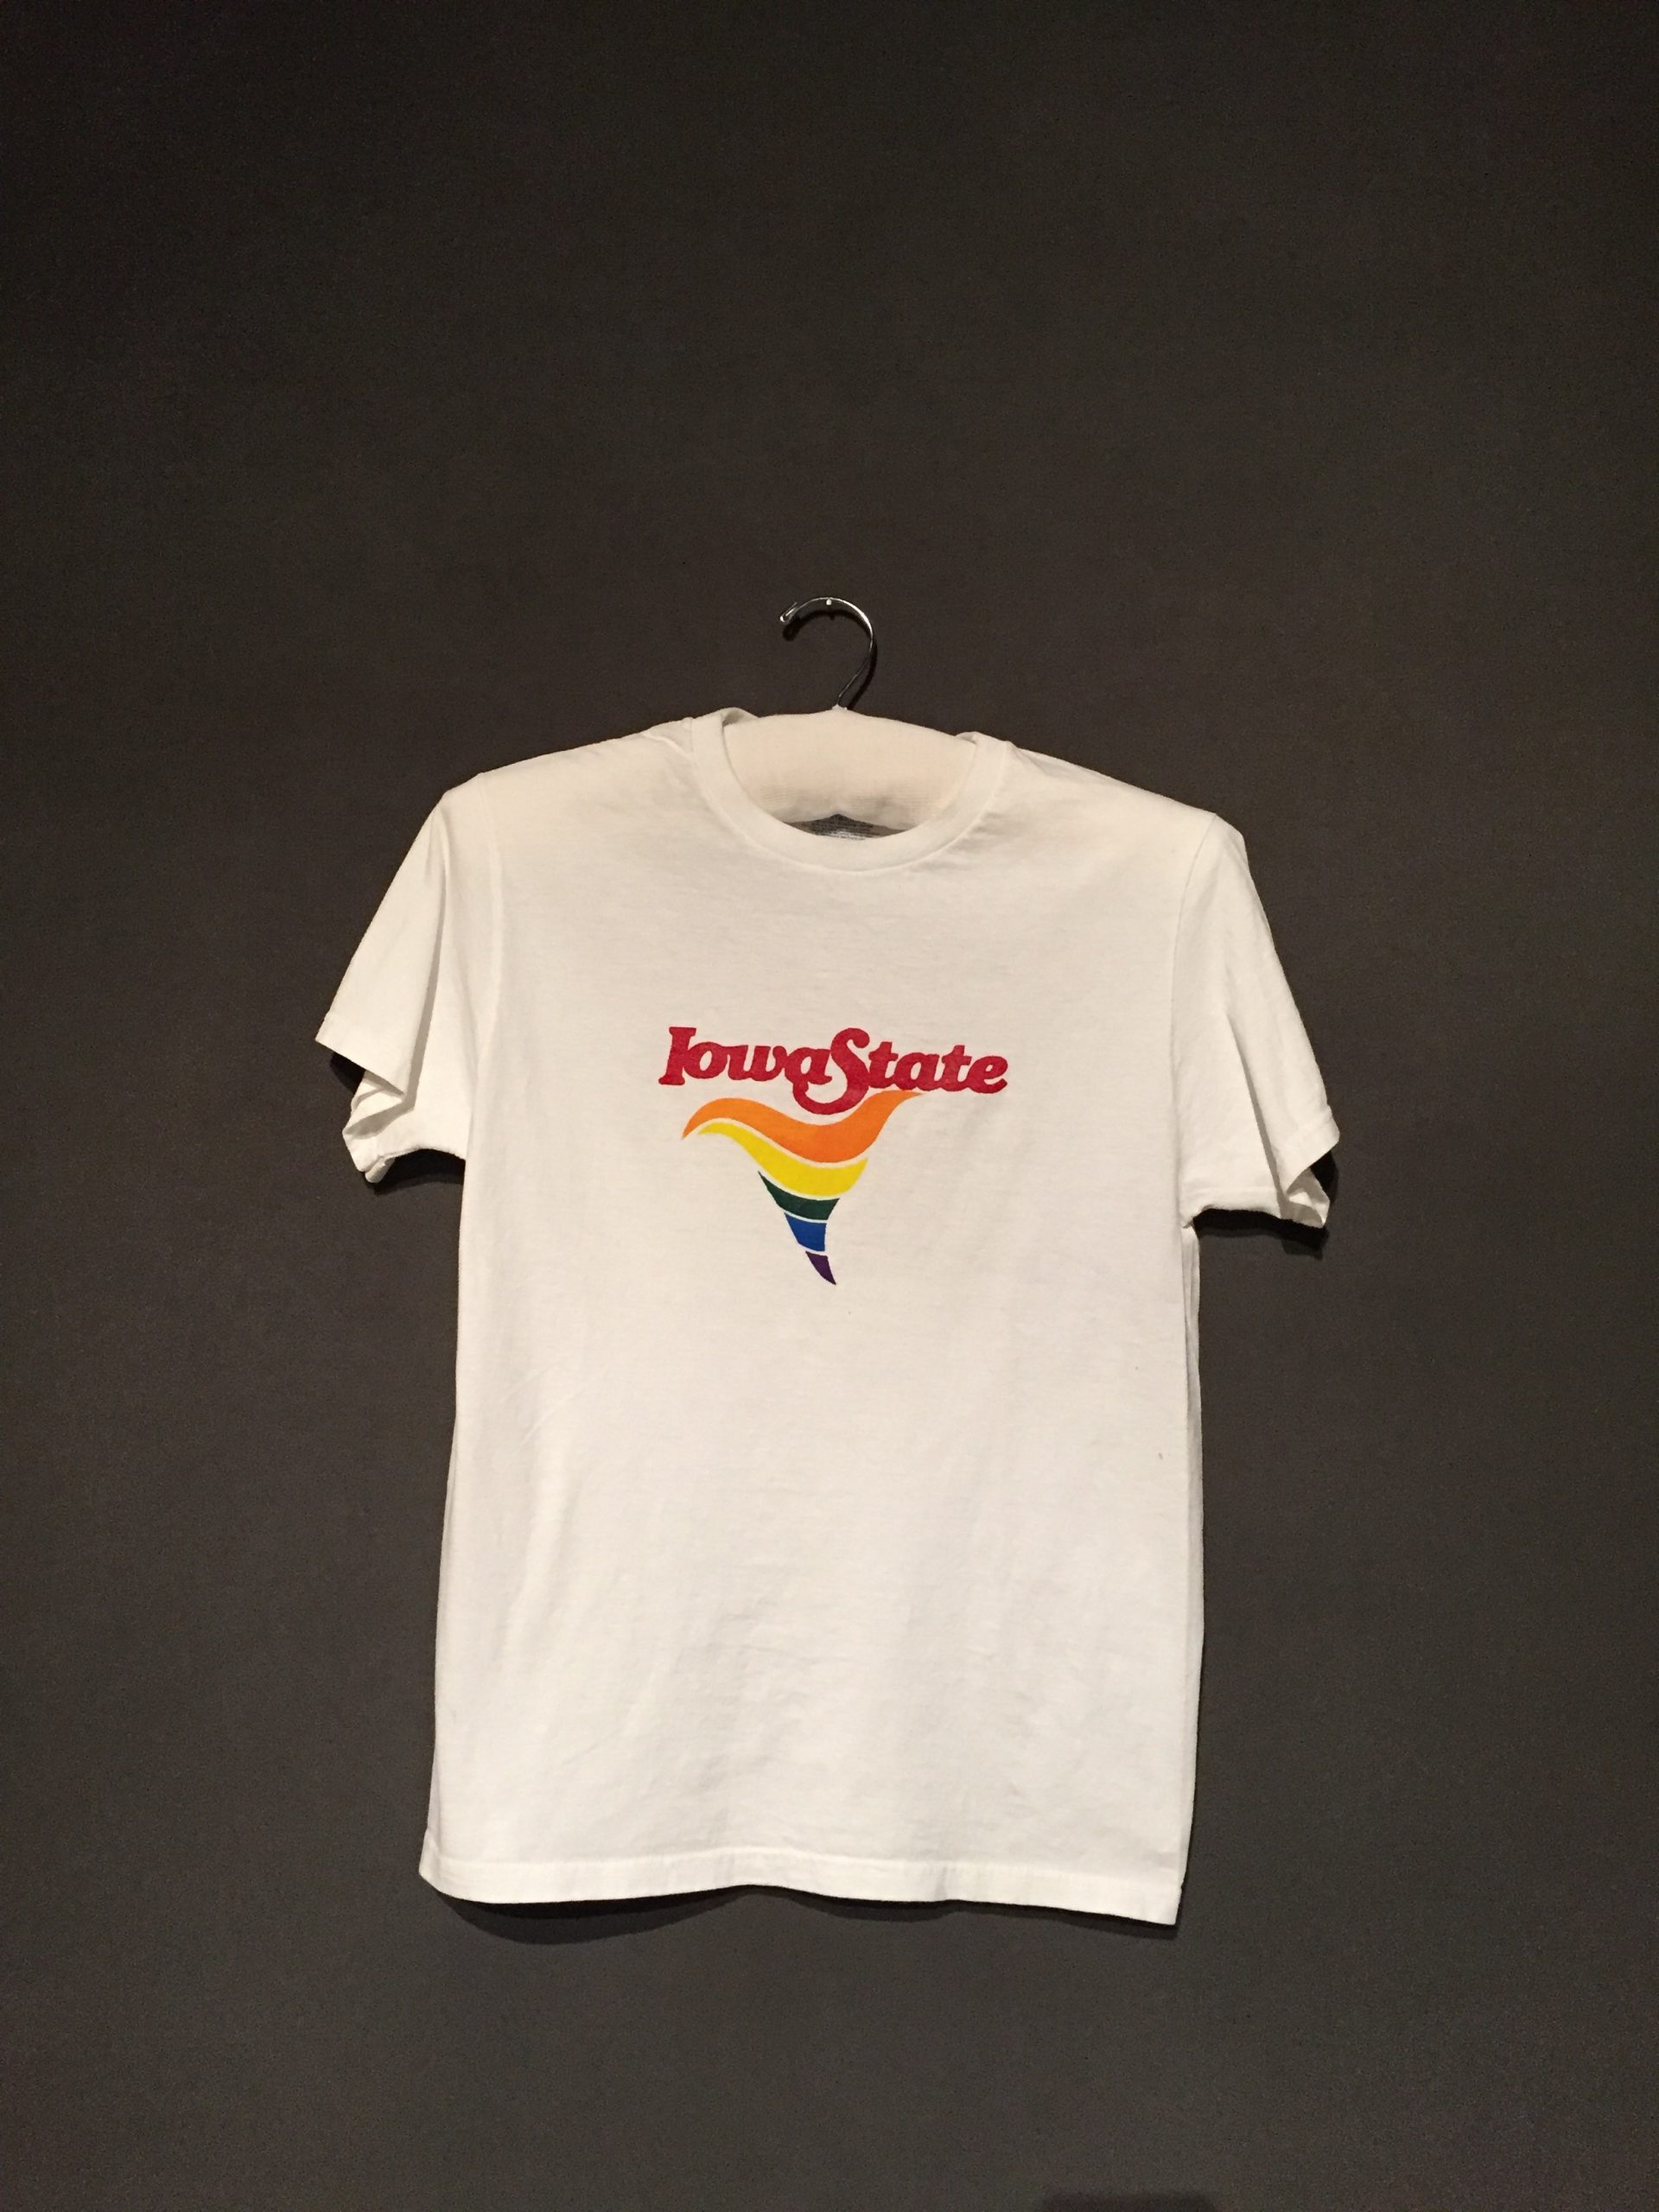 White short sleeve t-shirt with red text reading: "Iowa State" with a rainbow cyclone underneath